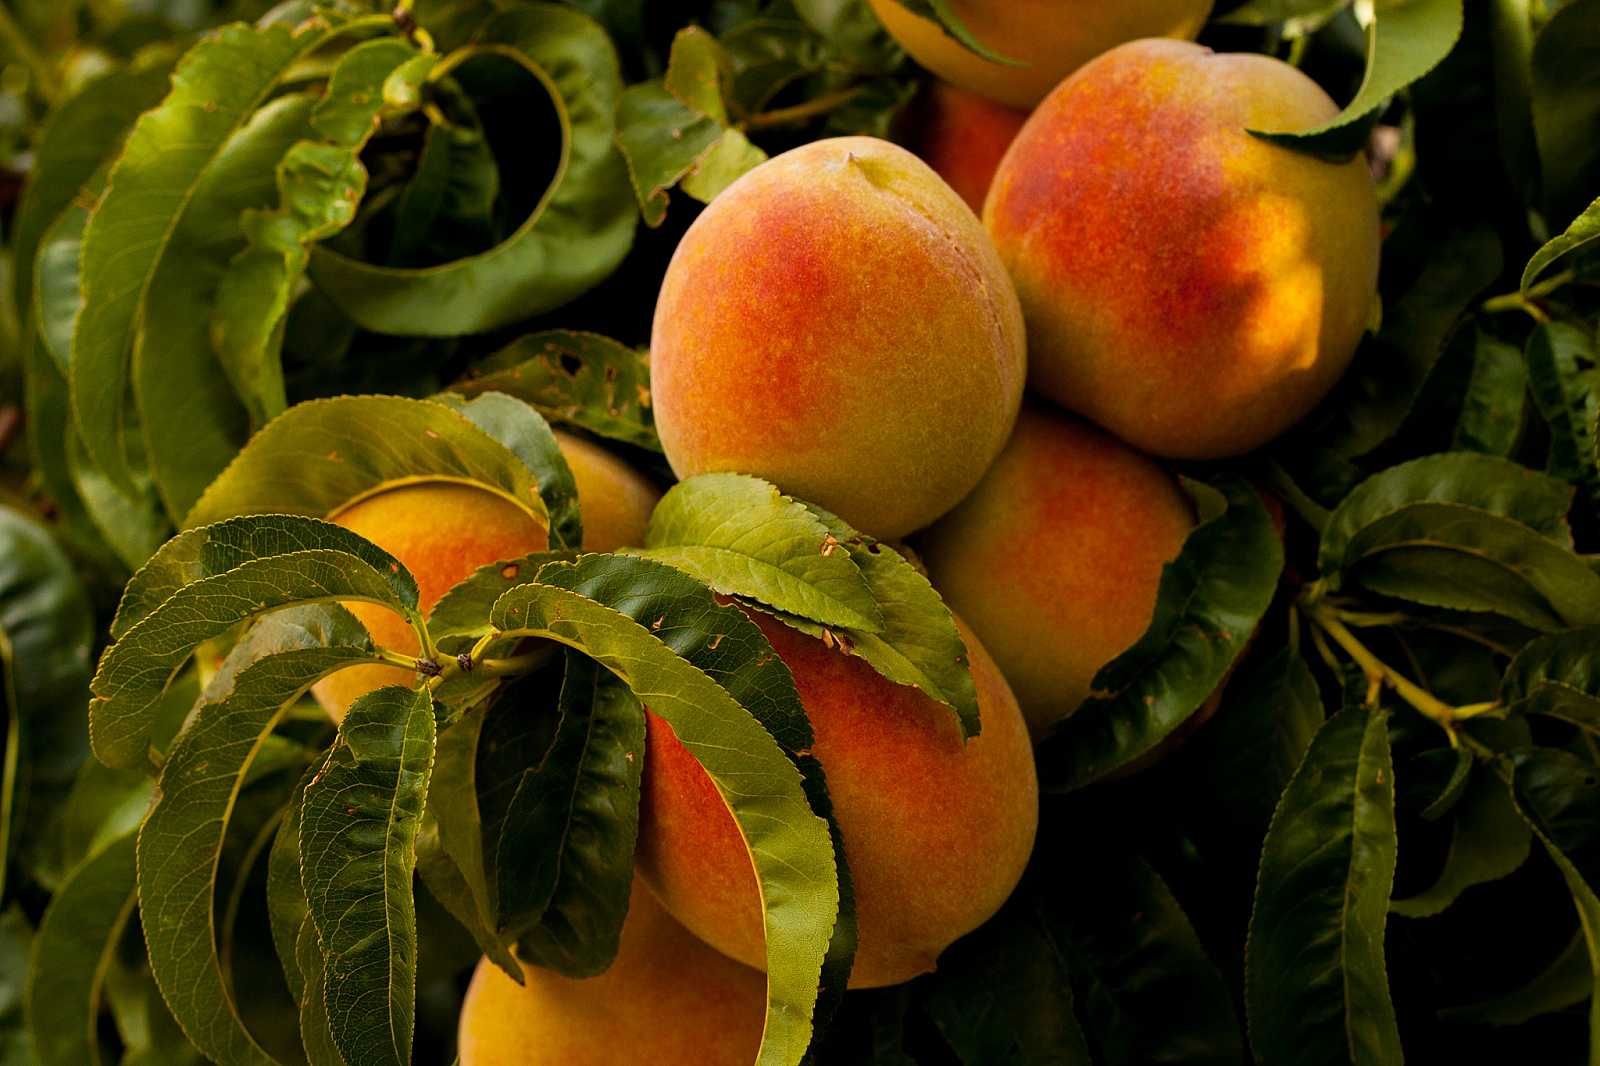 A bunch of peaches hanging from a tree with green leaves